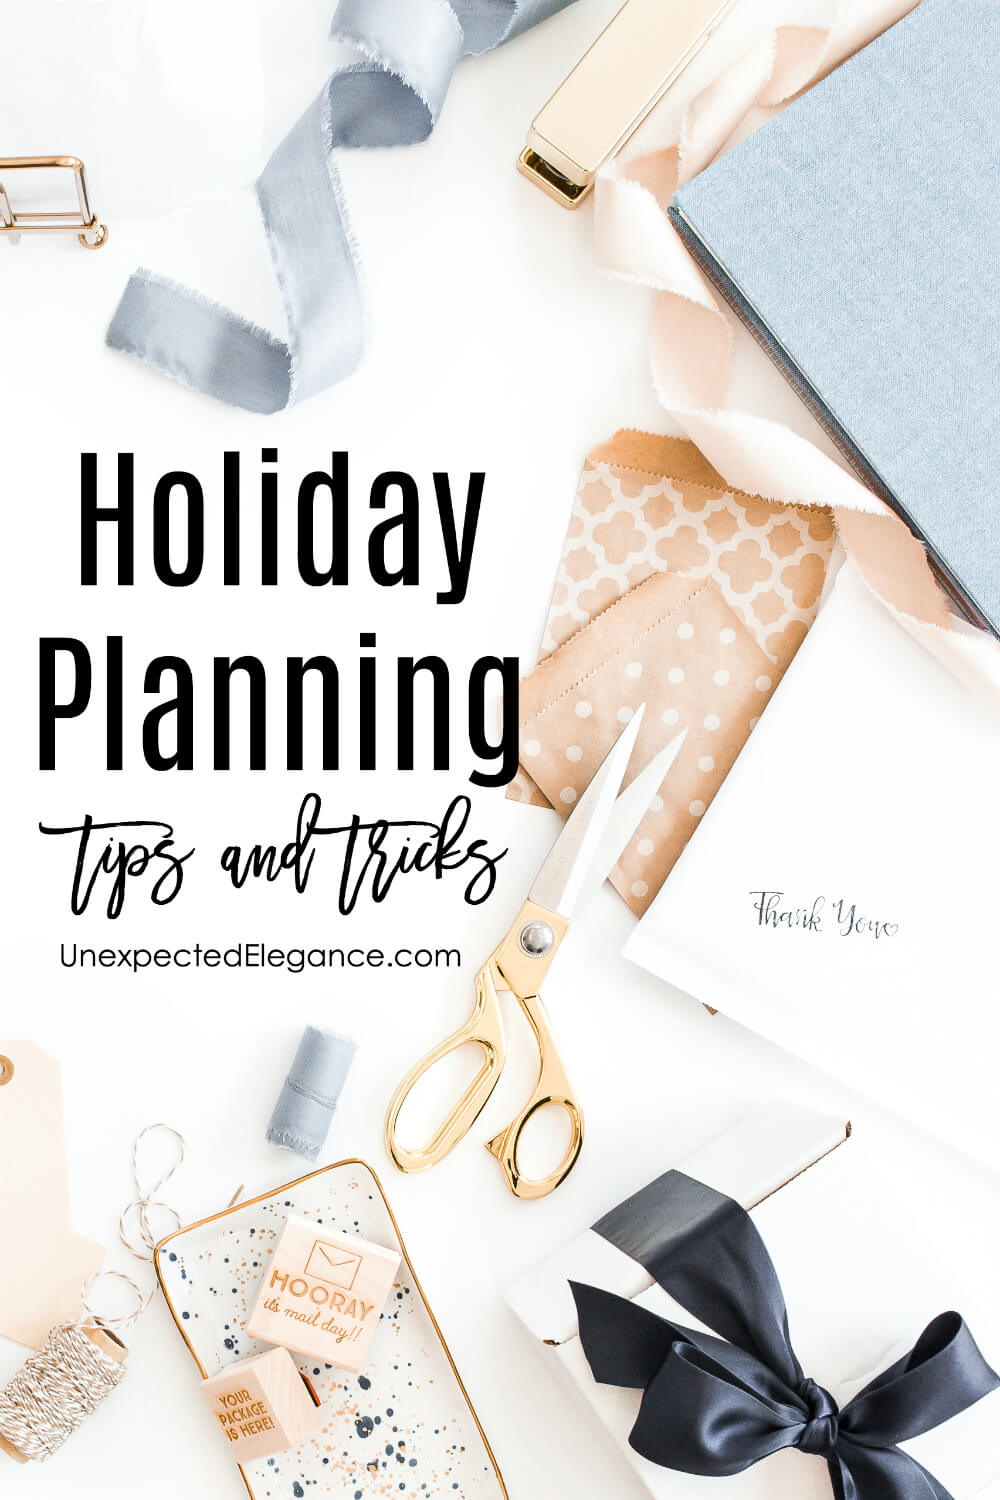 Get tips and tricks for saving time and money this holiday season. Also download a FREE holiday planning guide.